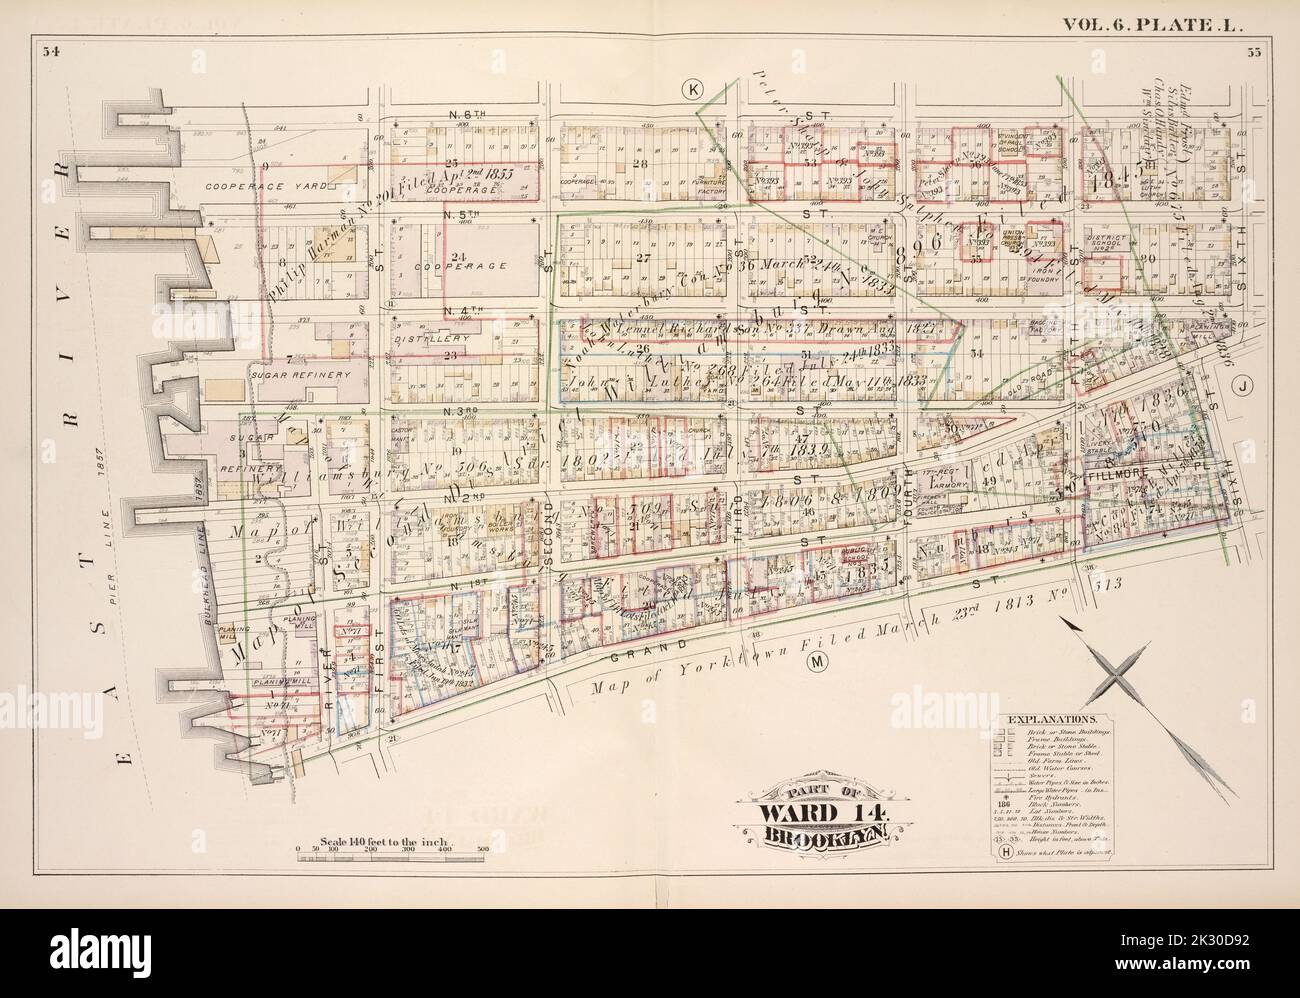 Cartografica, Mappe. 1880. Lionel Pincus e la Principessa Firyal Map Division. Brooklyn (New York, N.Y.), Real Property , New York (state) , New York Vol. 6. Plate, L. Mappa legata a N.6th St., Sixth St., Grand St., East River; incluso N.5th St., N.4th St., N.3rd St., N.2nd St., Fillmore Pl., N.1st St., First St., Second St., Third St., Fourth St., Fifth St Foto Stock